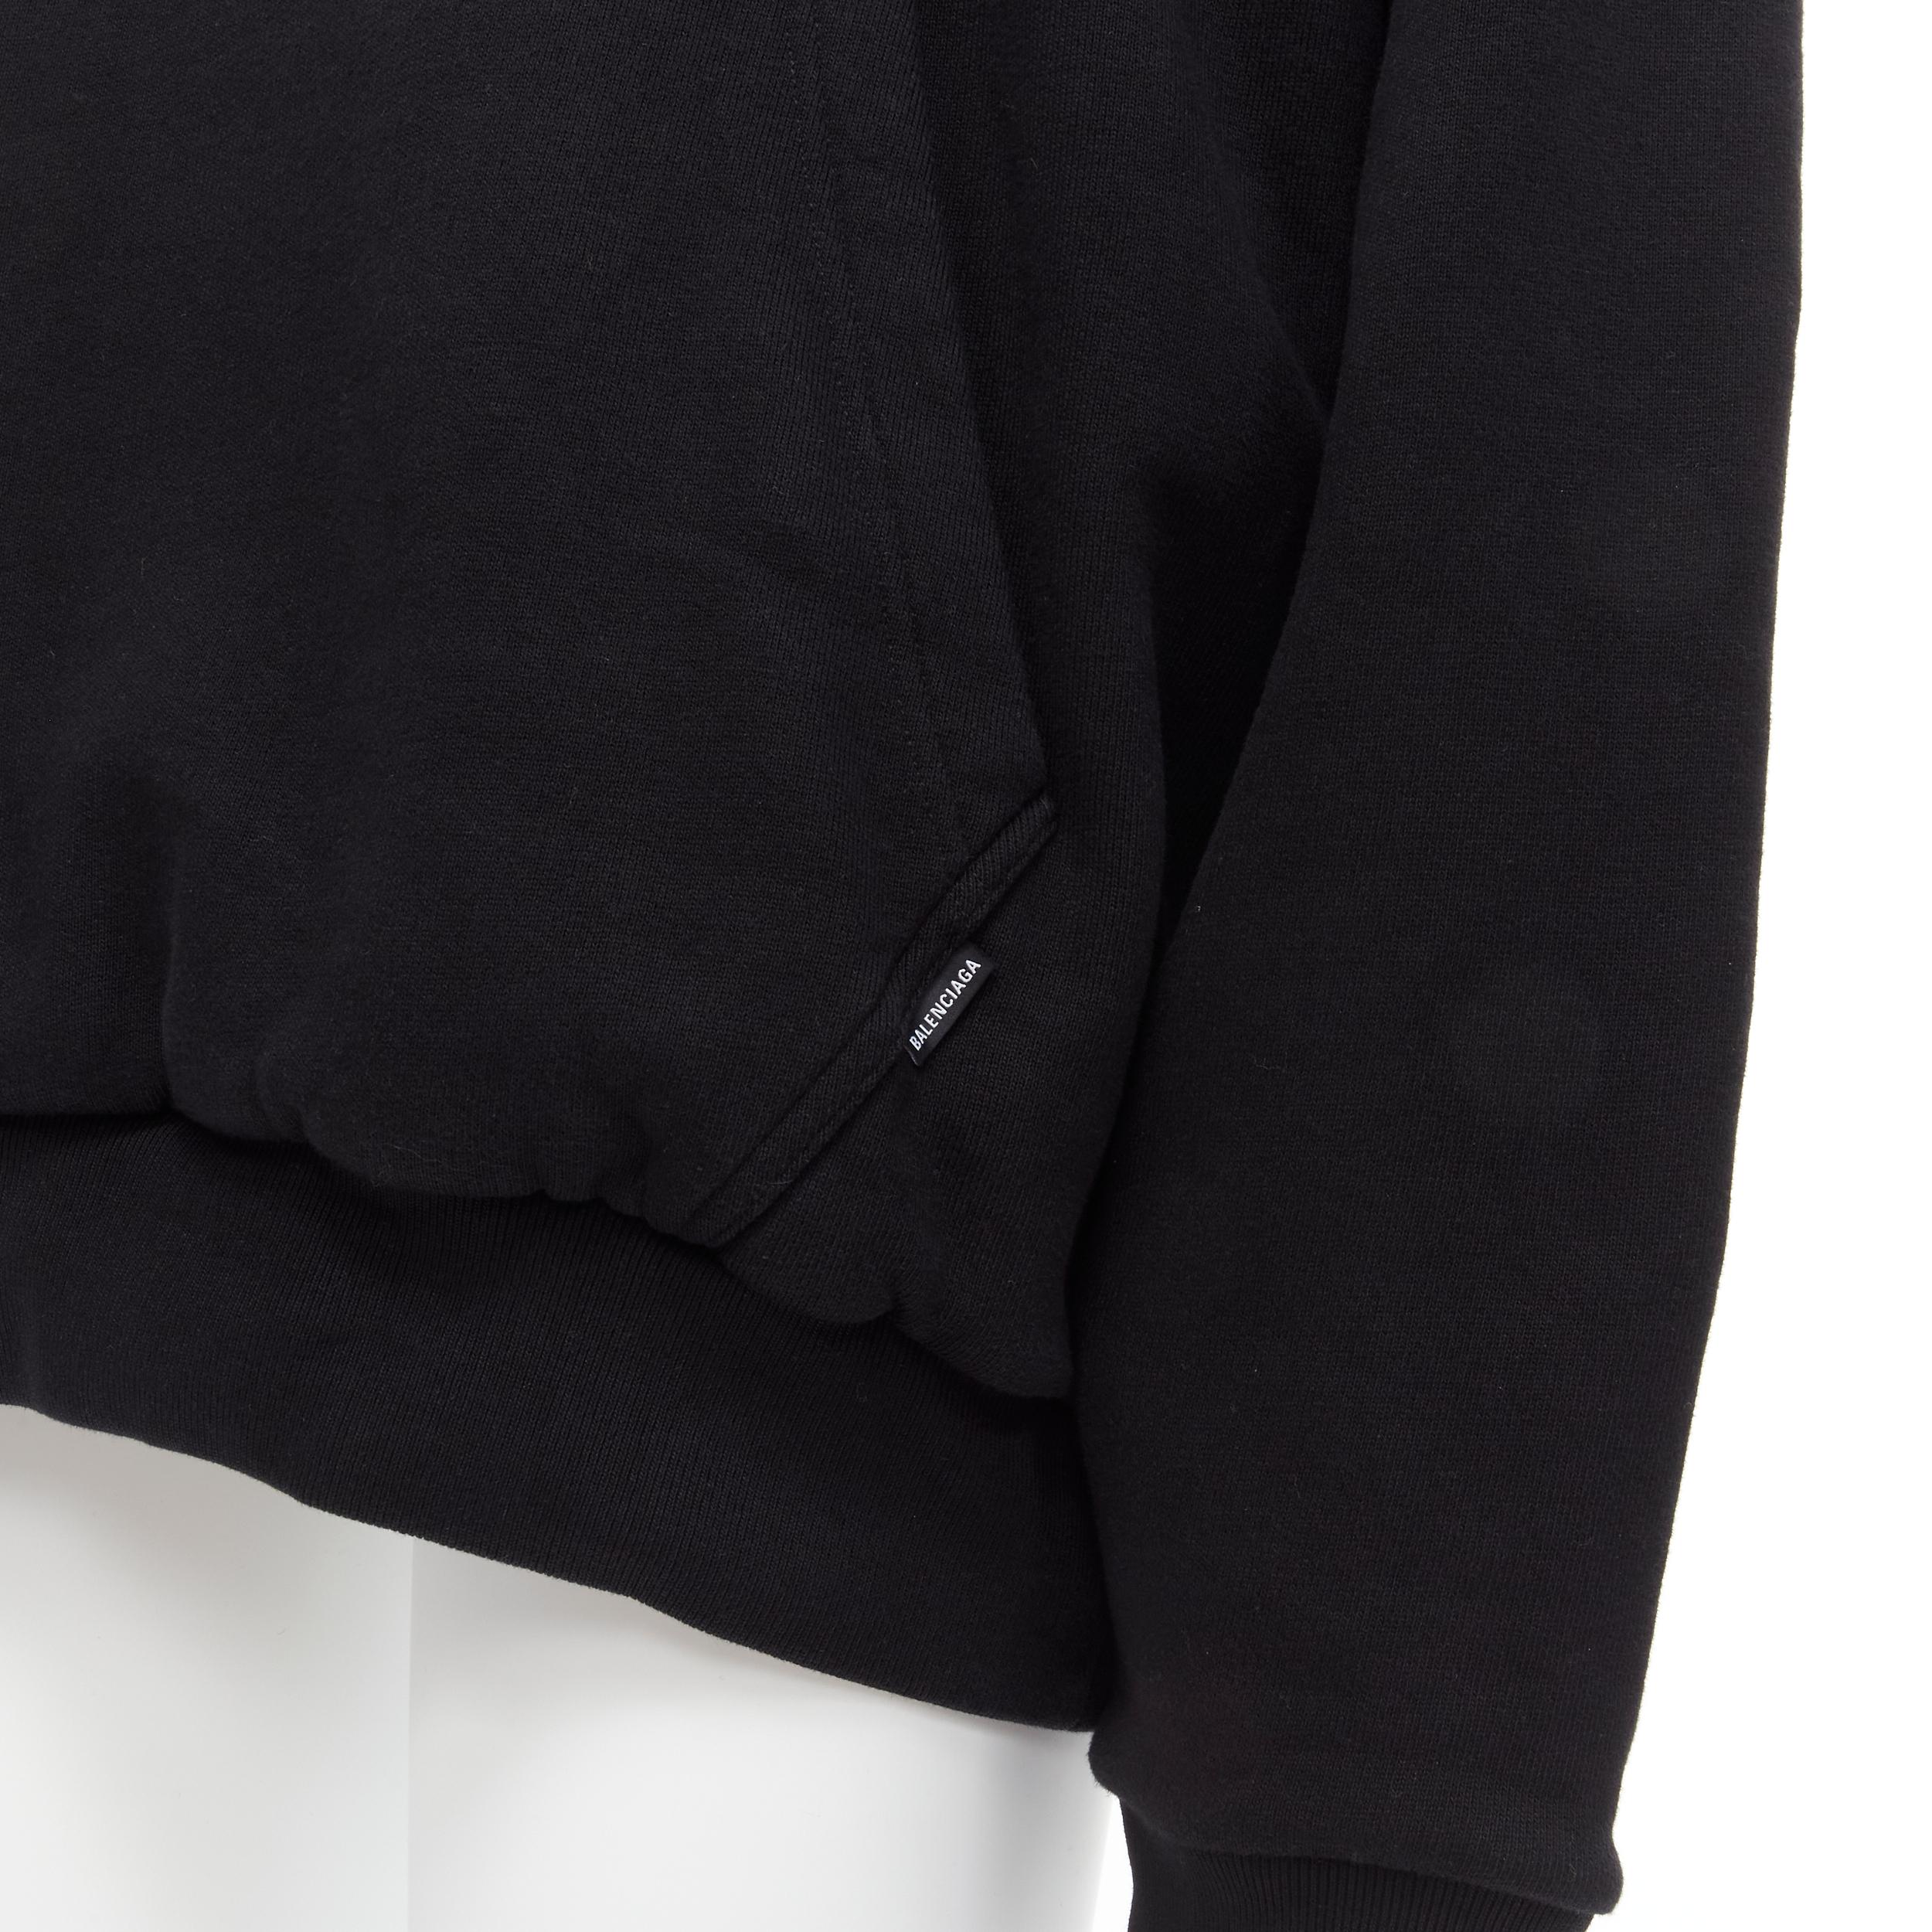 new BALENCIAGA Demna 2018 black I Love Techno embroidered oversized hoodie S 
Reference: TGAS/C00490 
Brand: Balenciaga 
Designer: Demna 
Collection: 2018 
Material: Cotton 
Color: Black 
Pattern: Solid 
Closure: Snap 
Extra Detail: Black heavy